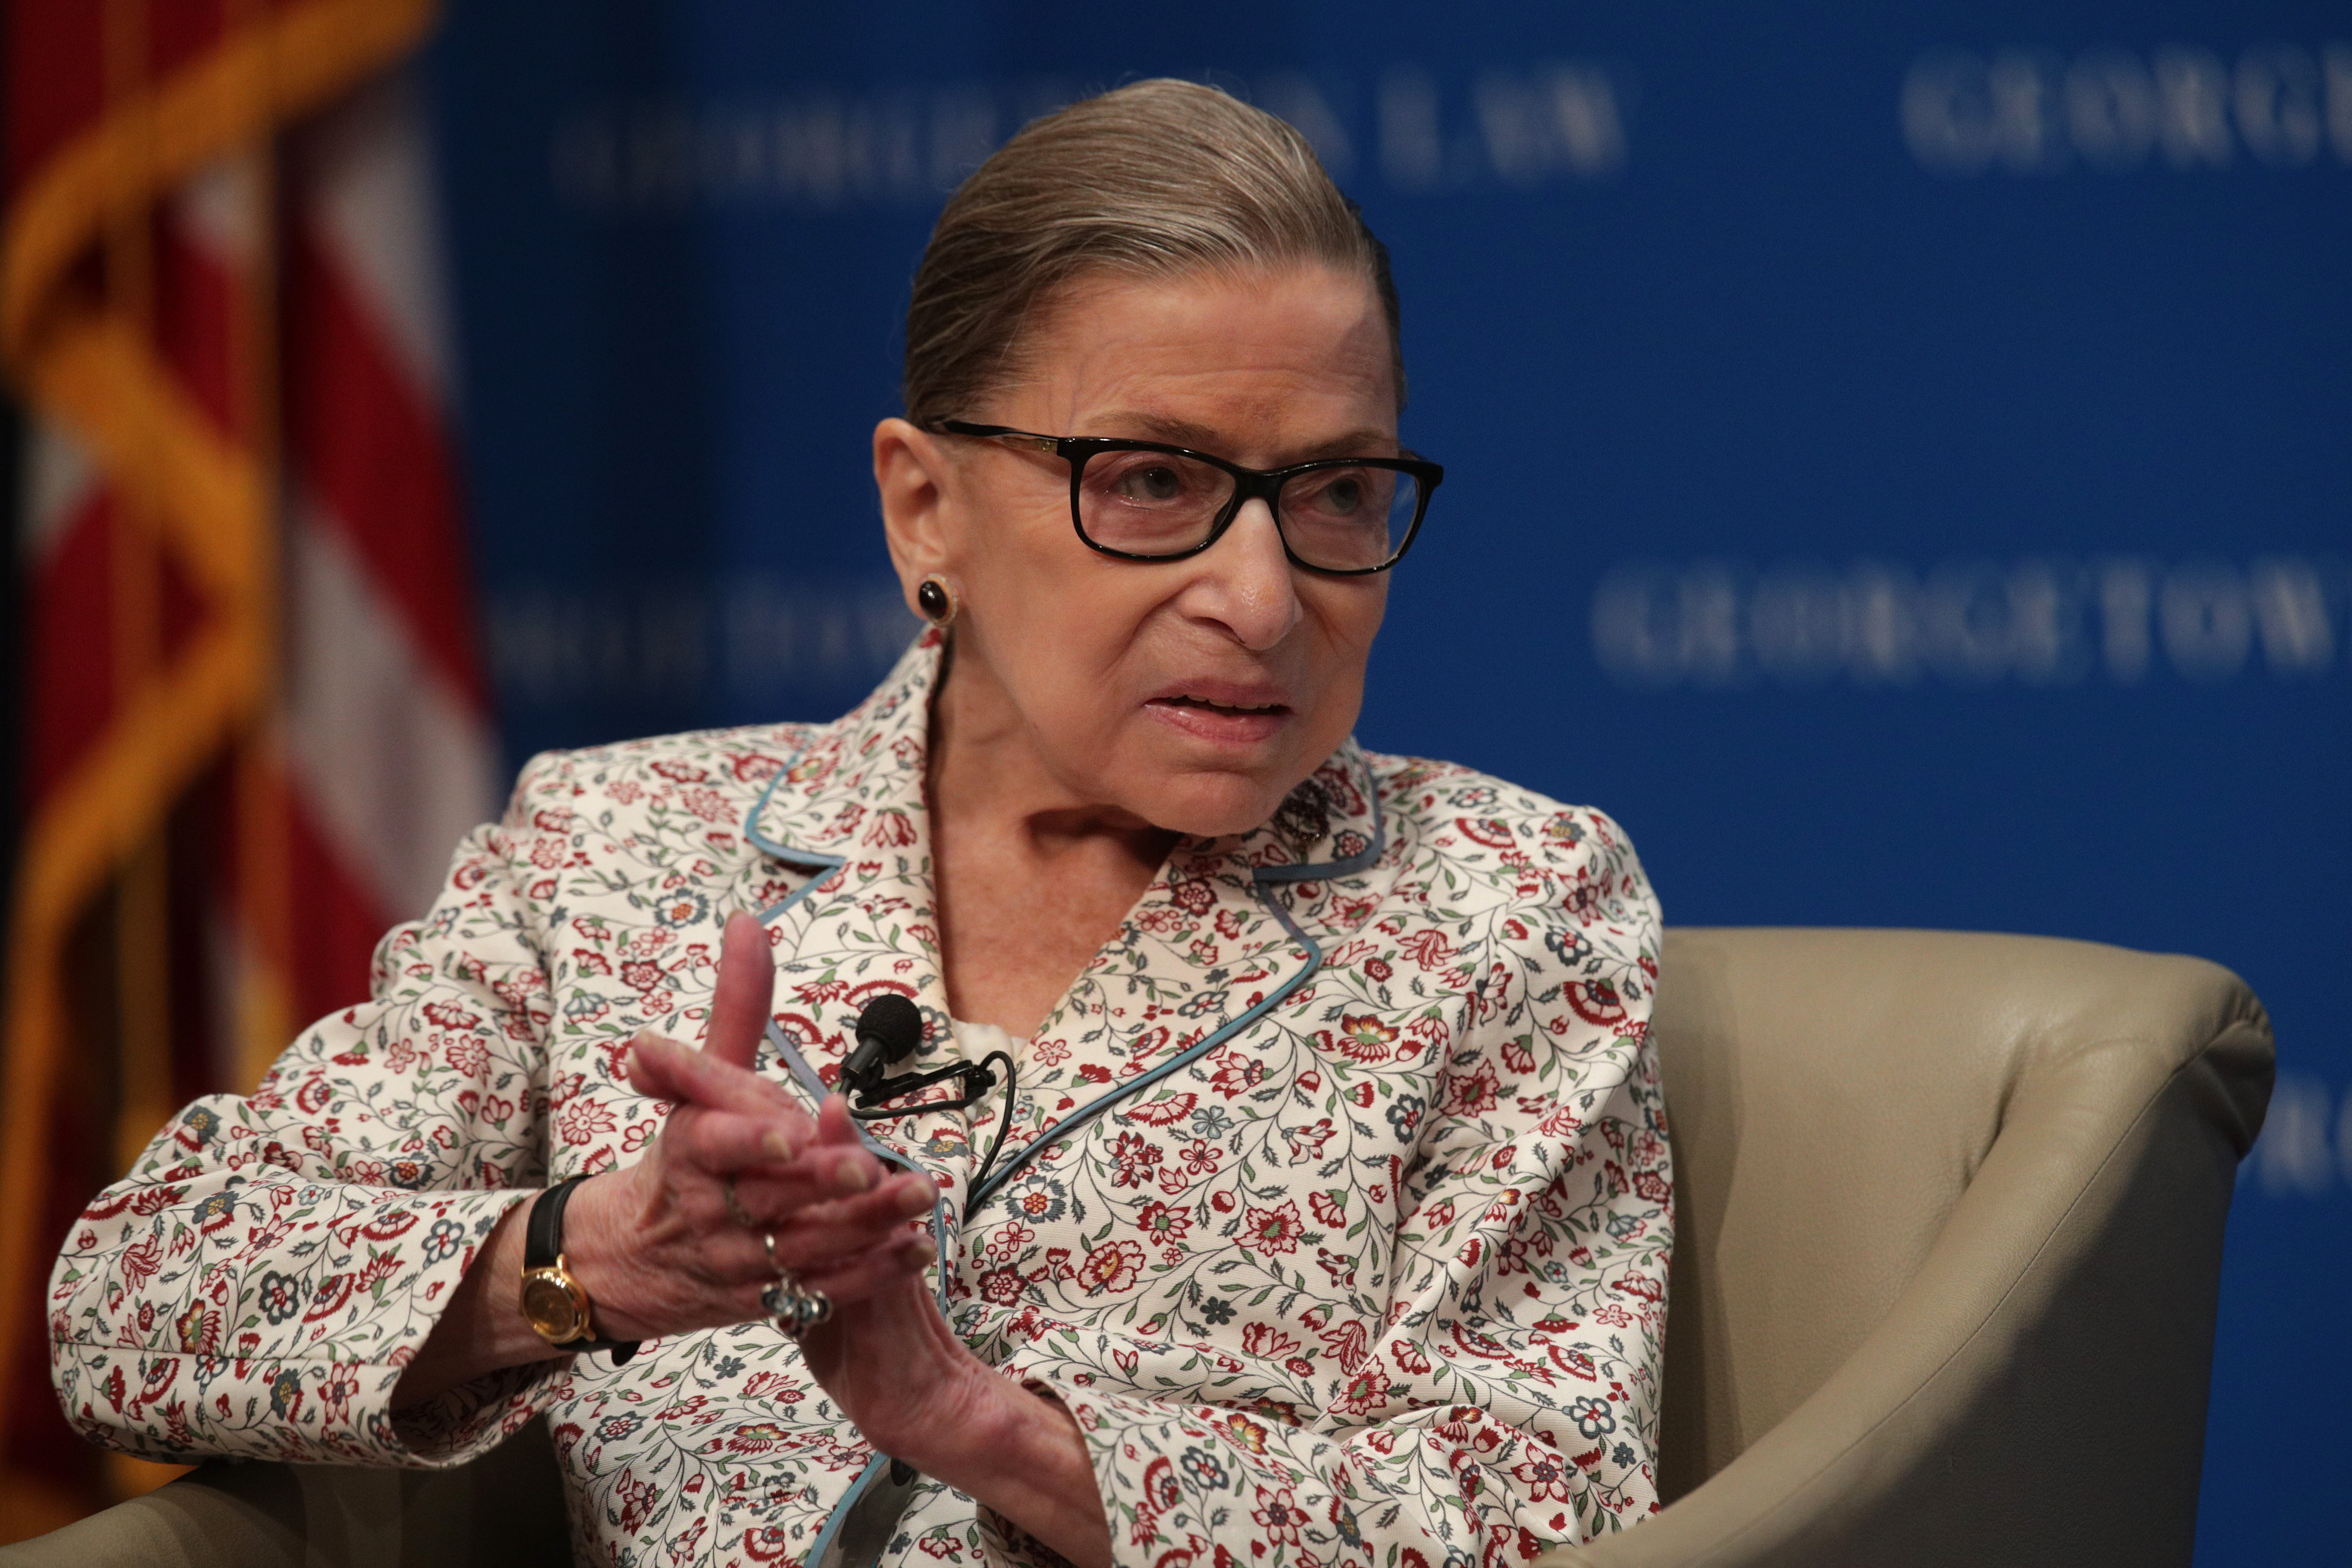 Justice Ruth Bader Ginsburg participates in a discussion at Georgetown University Law Center on July 2, 2019. (Alex Wong/Getty Images)